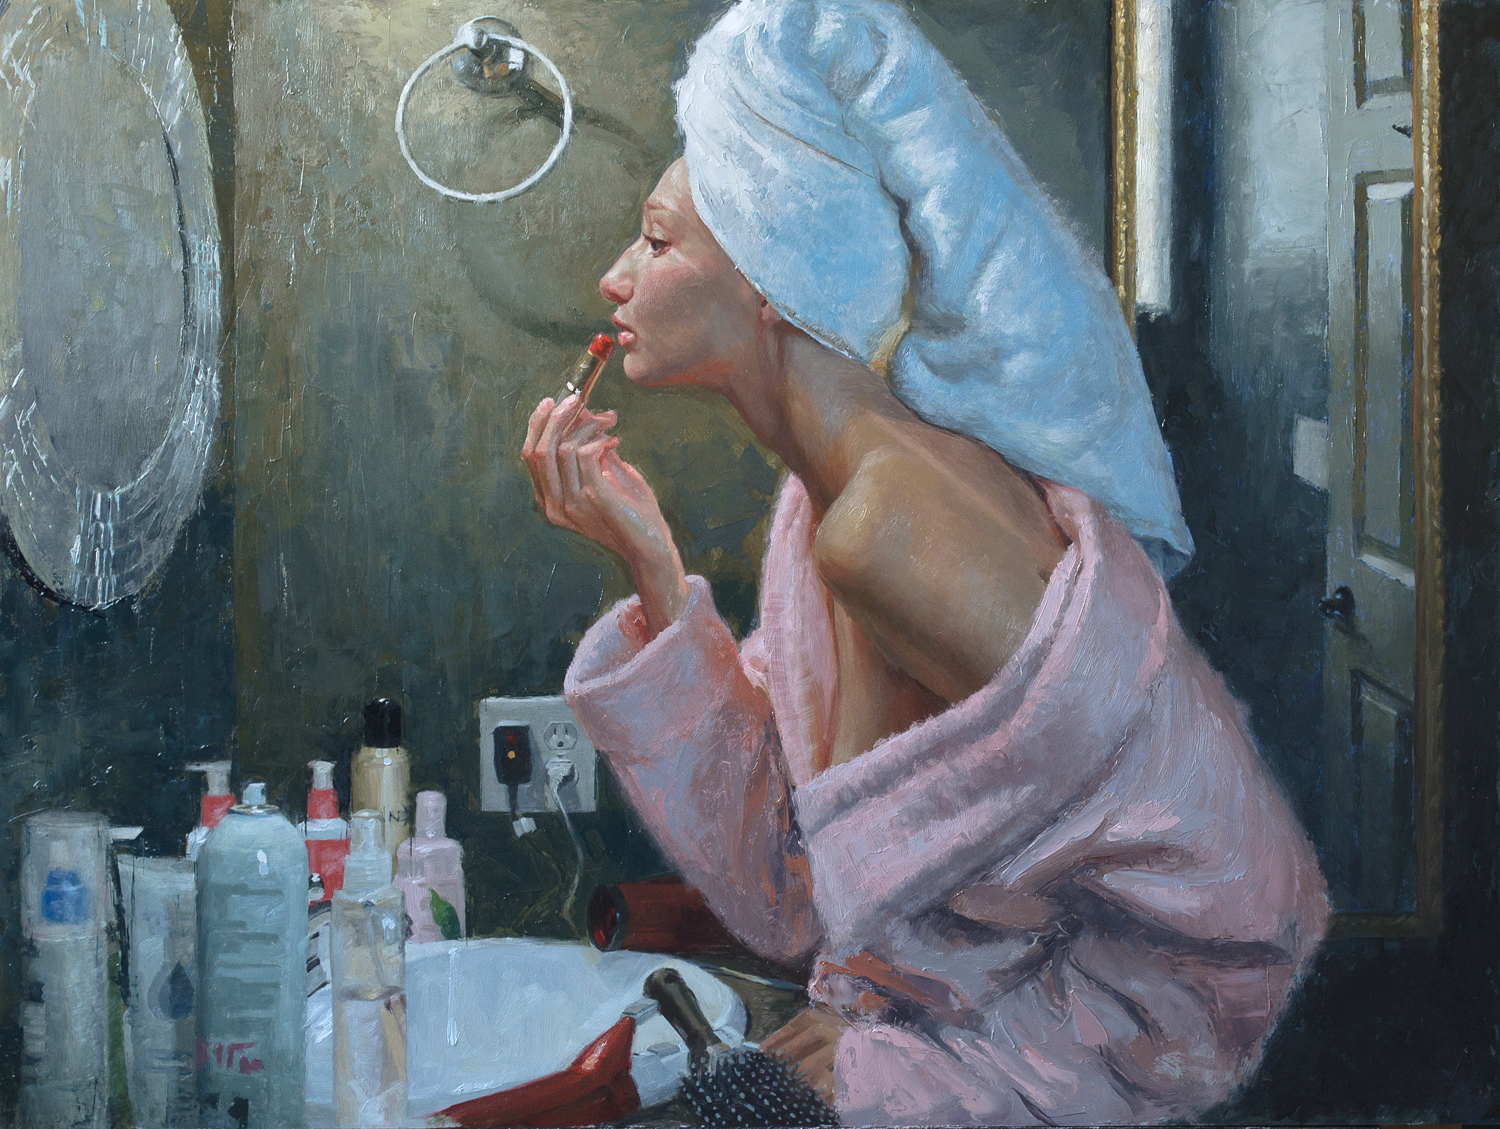 Casey Childs, "Natural Beauty," 24 x 32 inches, Oil on panel